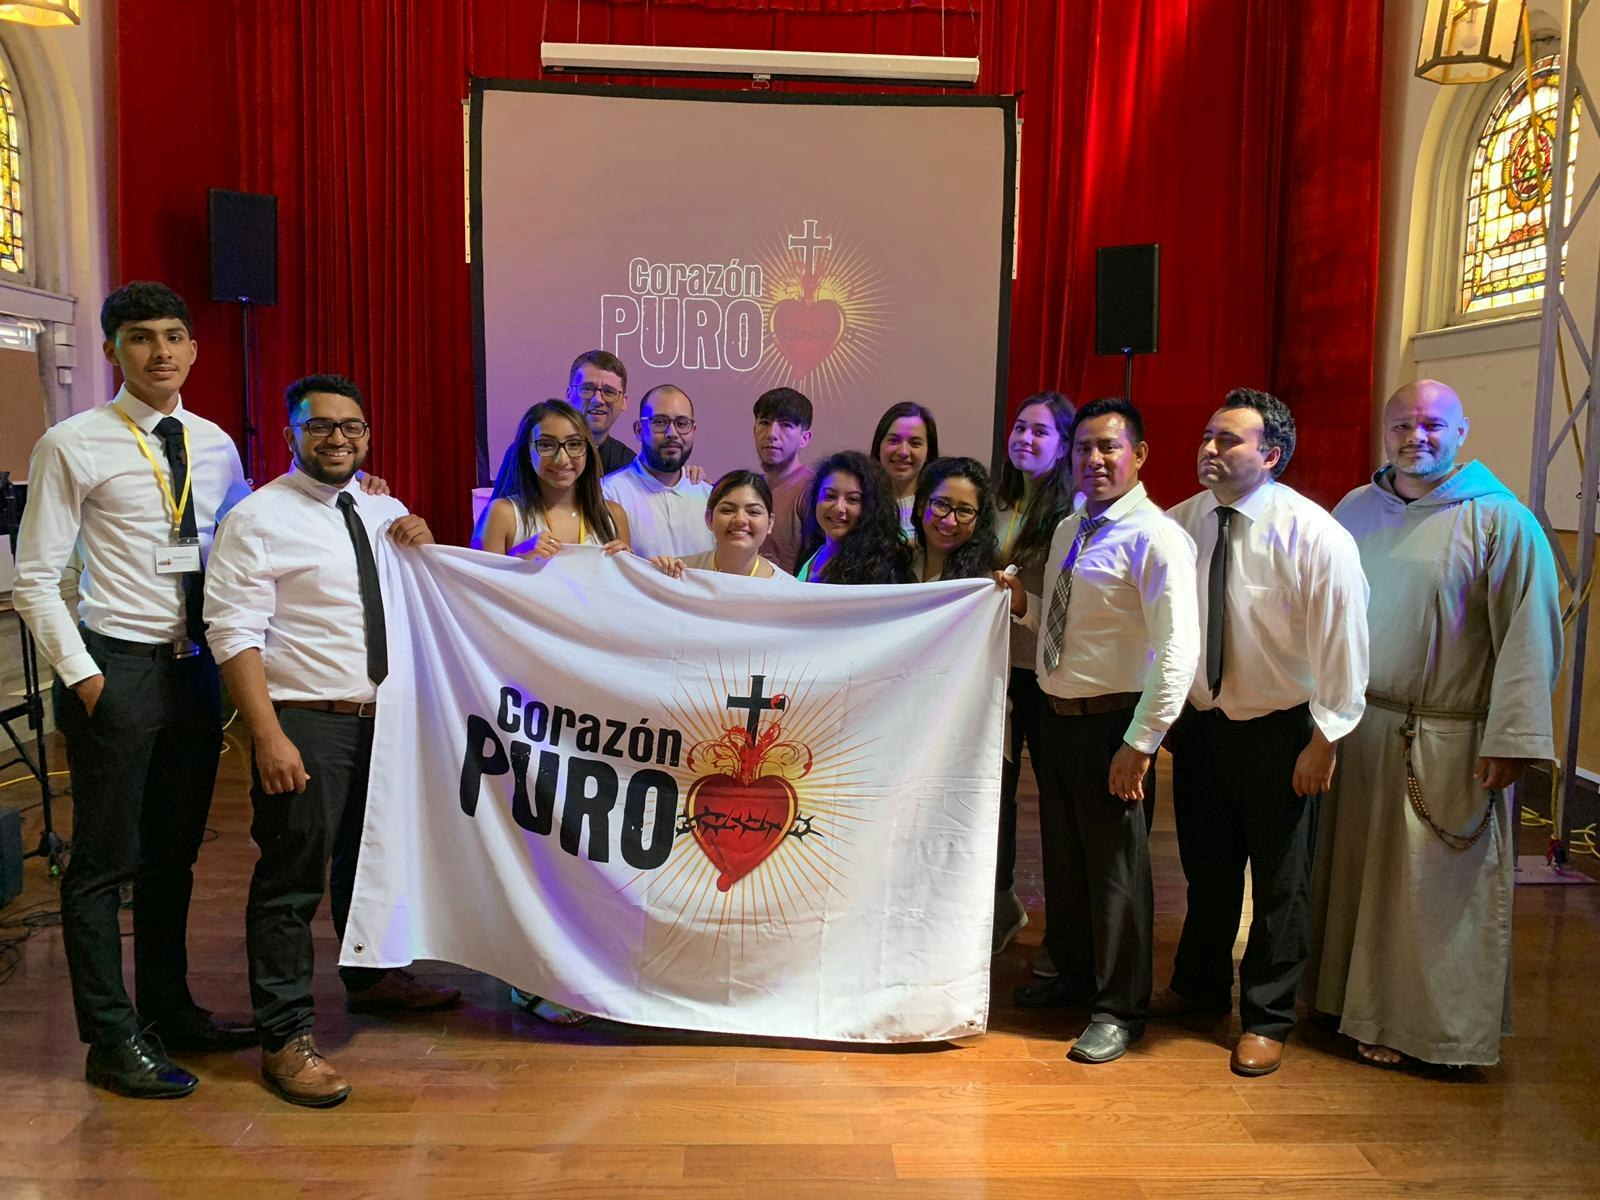 The Detroit chapter, which is known as "Cor Ignis," began three years ago, inspired by the New York-based "Corazon Puro" ("Pure of Heart" in Latin), which was begun by Fr. Agustino Torres, CFR, as a way to reach young Latinos with the message of St. John Paul II's Theology of the Body. (Courtesy of Cor Ignis)